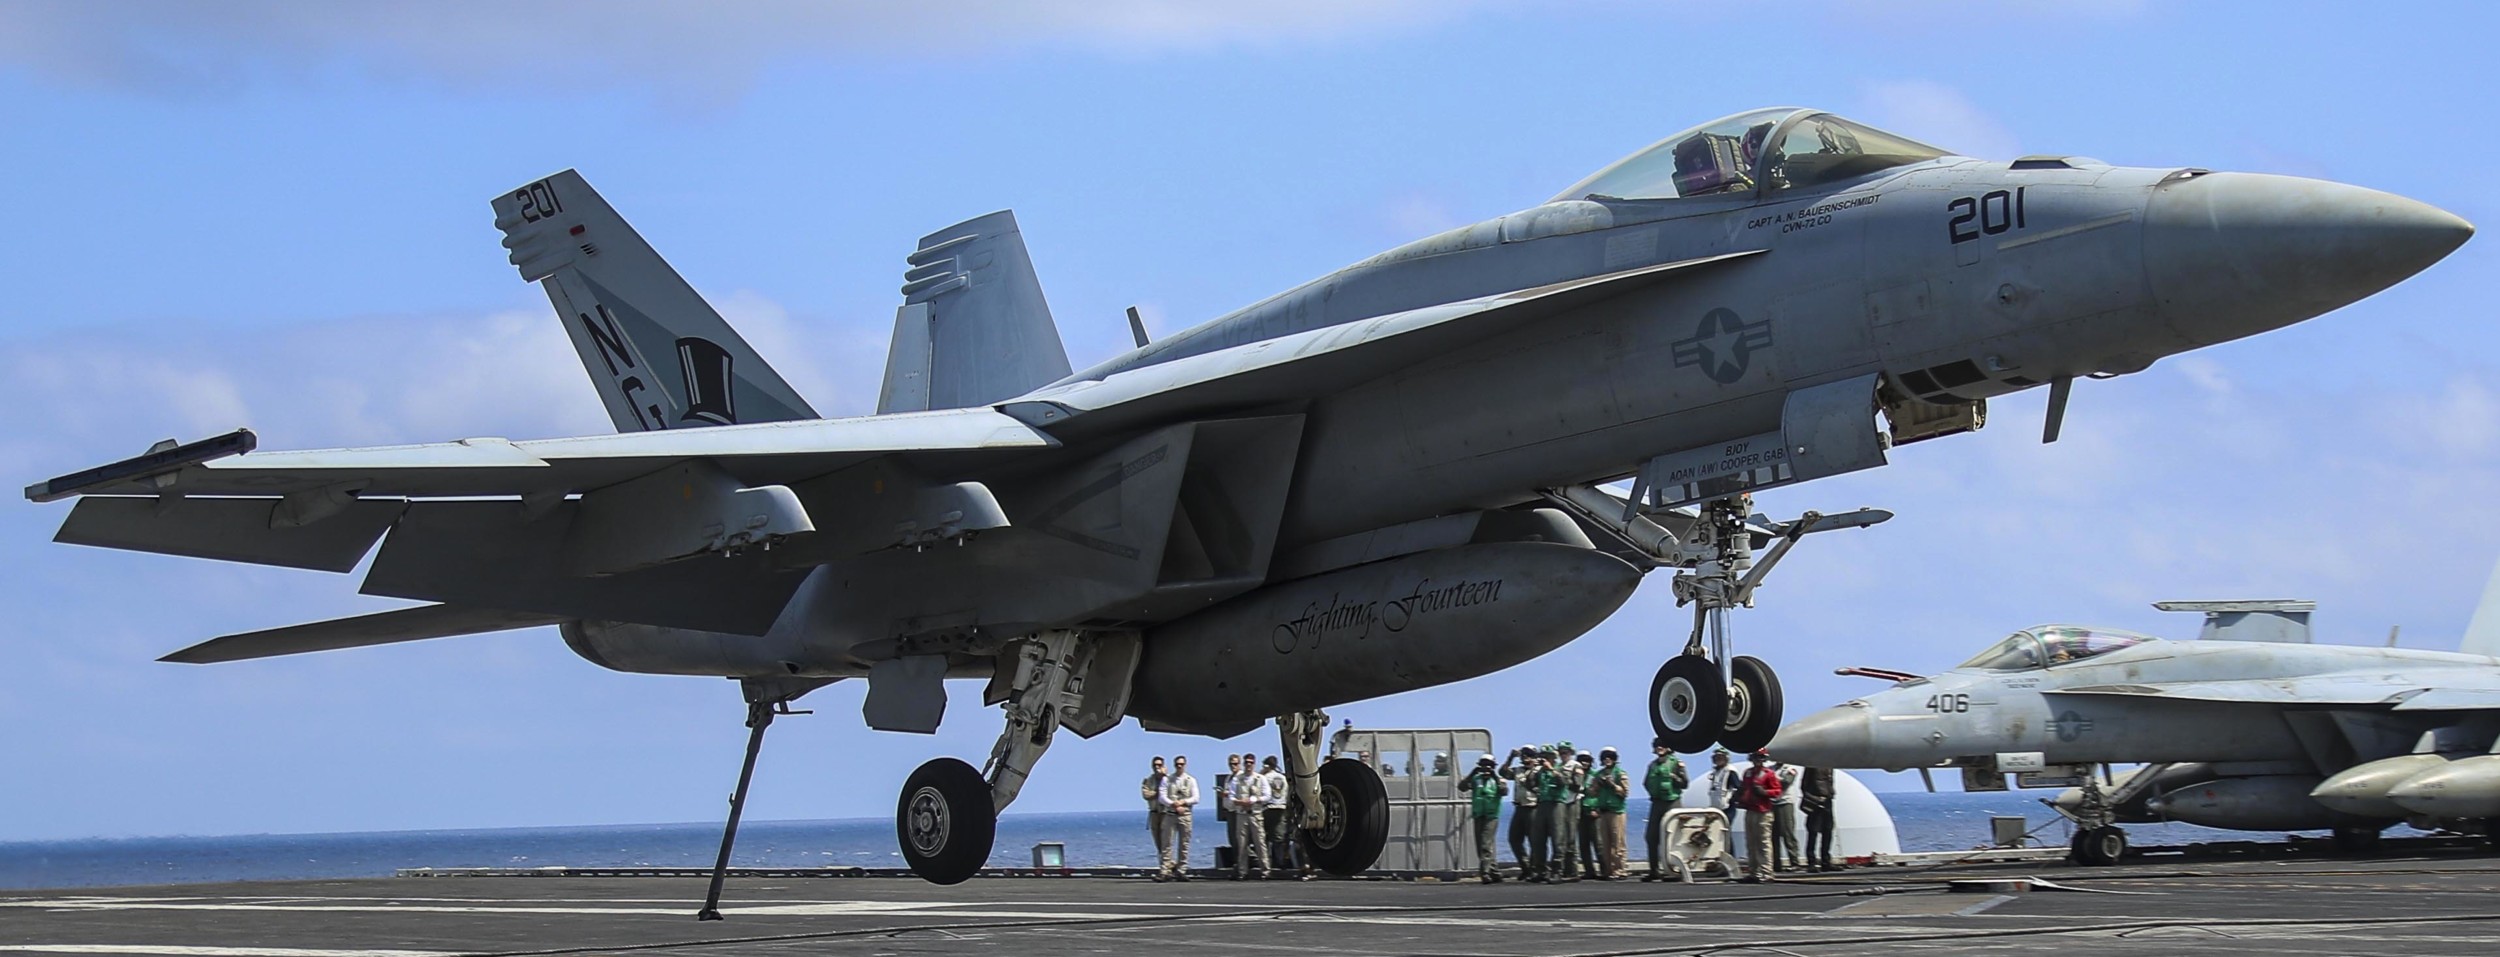 vfa-14 tophatters strike fighter squadron f/a-18e super hornet cvn-72 uss abraham lincoln cvw-9 us navy 70